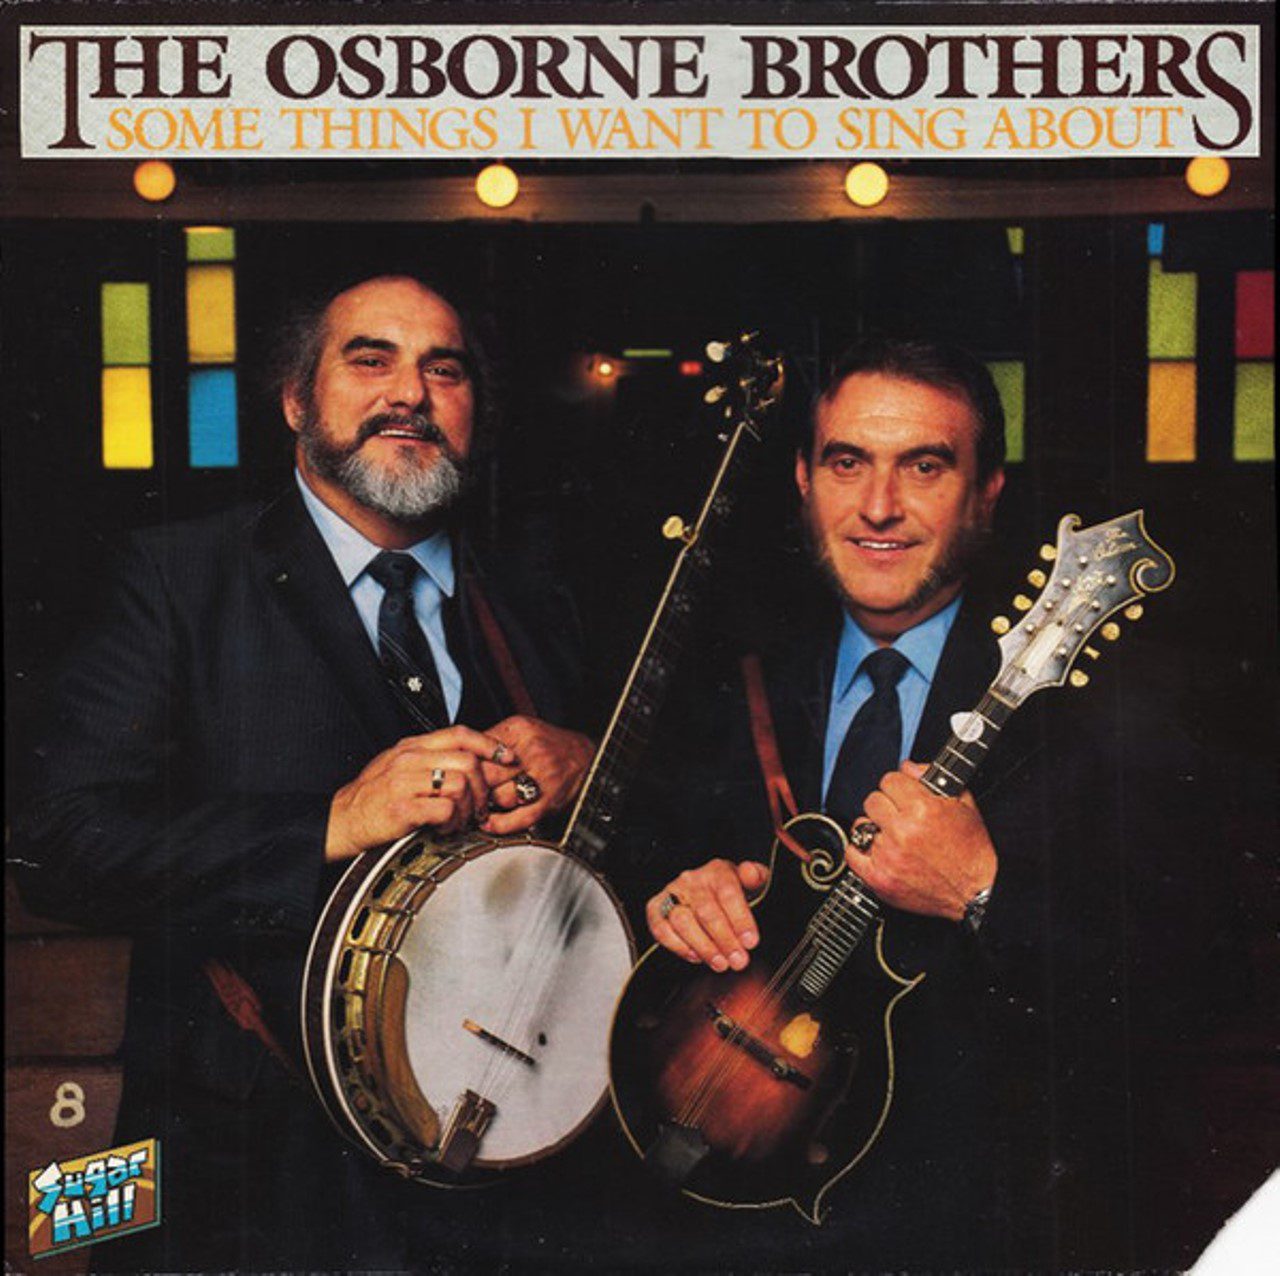 Osborne Brothers – Some Things I Want To Sing About cover album